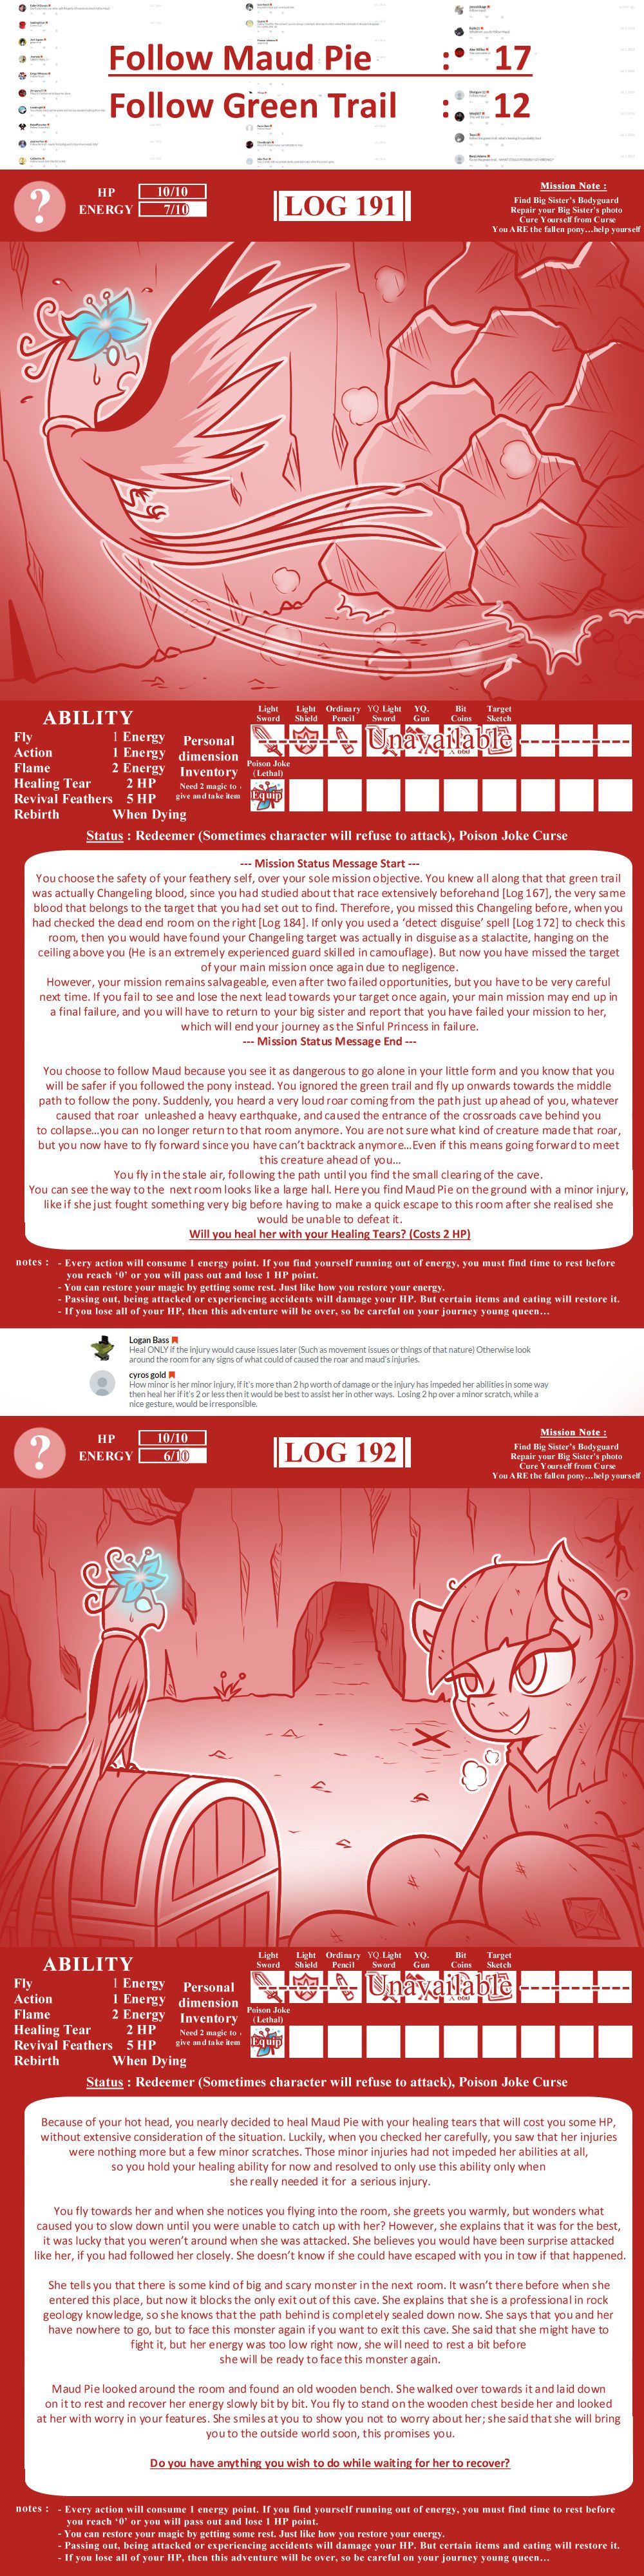 [Vavacung] The Adventure Logs Of Young Queen (My Little Pony Friendship is Magic) [Updated] [Ongoing] 56